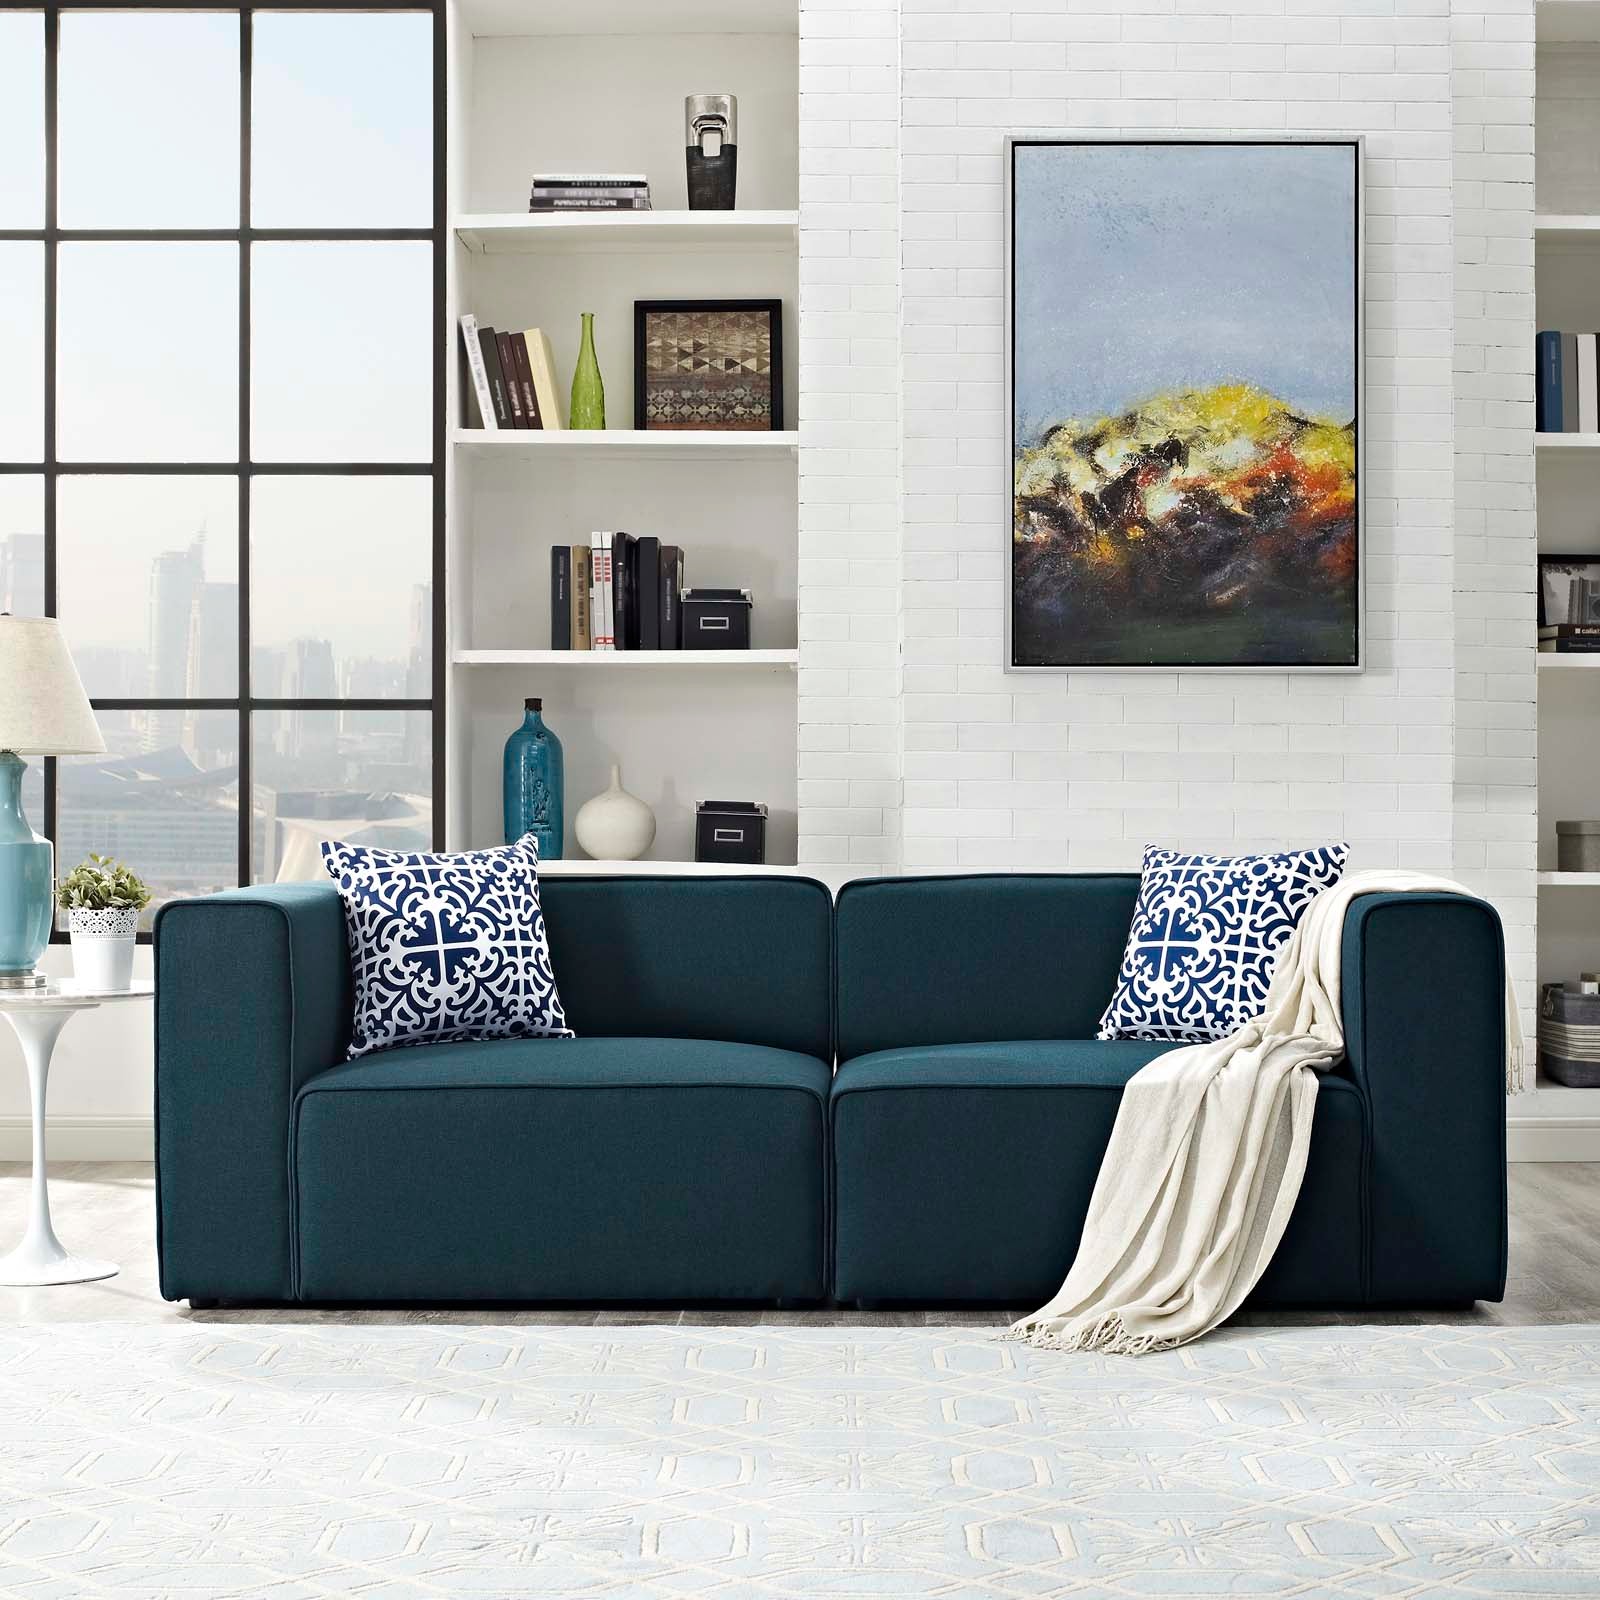 Modway Sectional Sofas - Mingle 2 Piece Upholstered Fabric Sectional Sofa Set